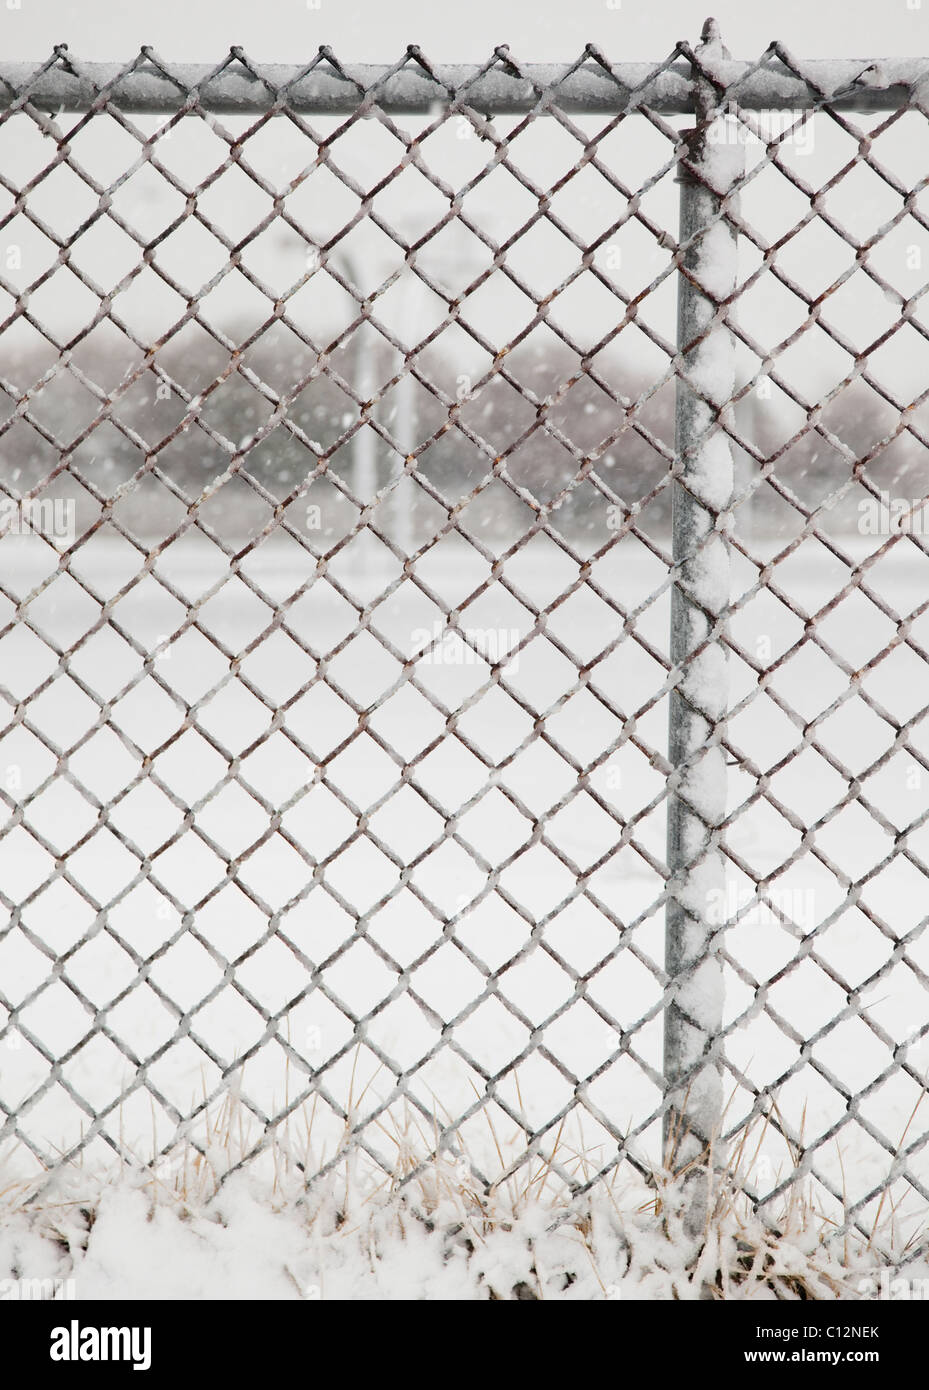 USA, New York State, Rockaway Beach, chainlink fence en hiver Banque D'Images